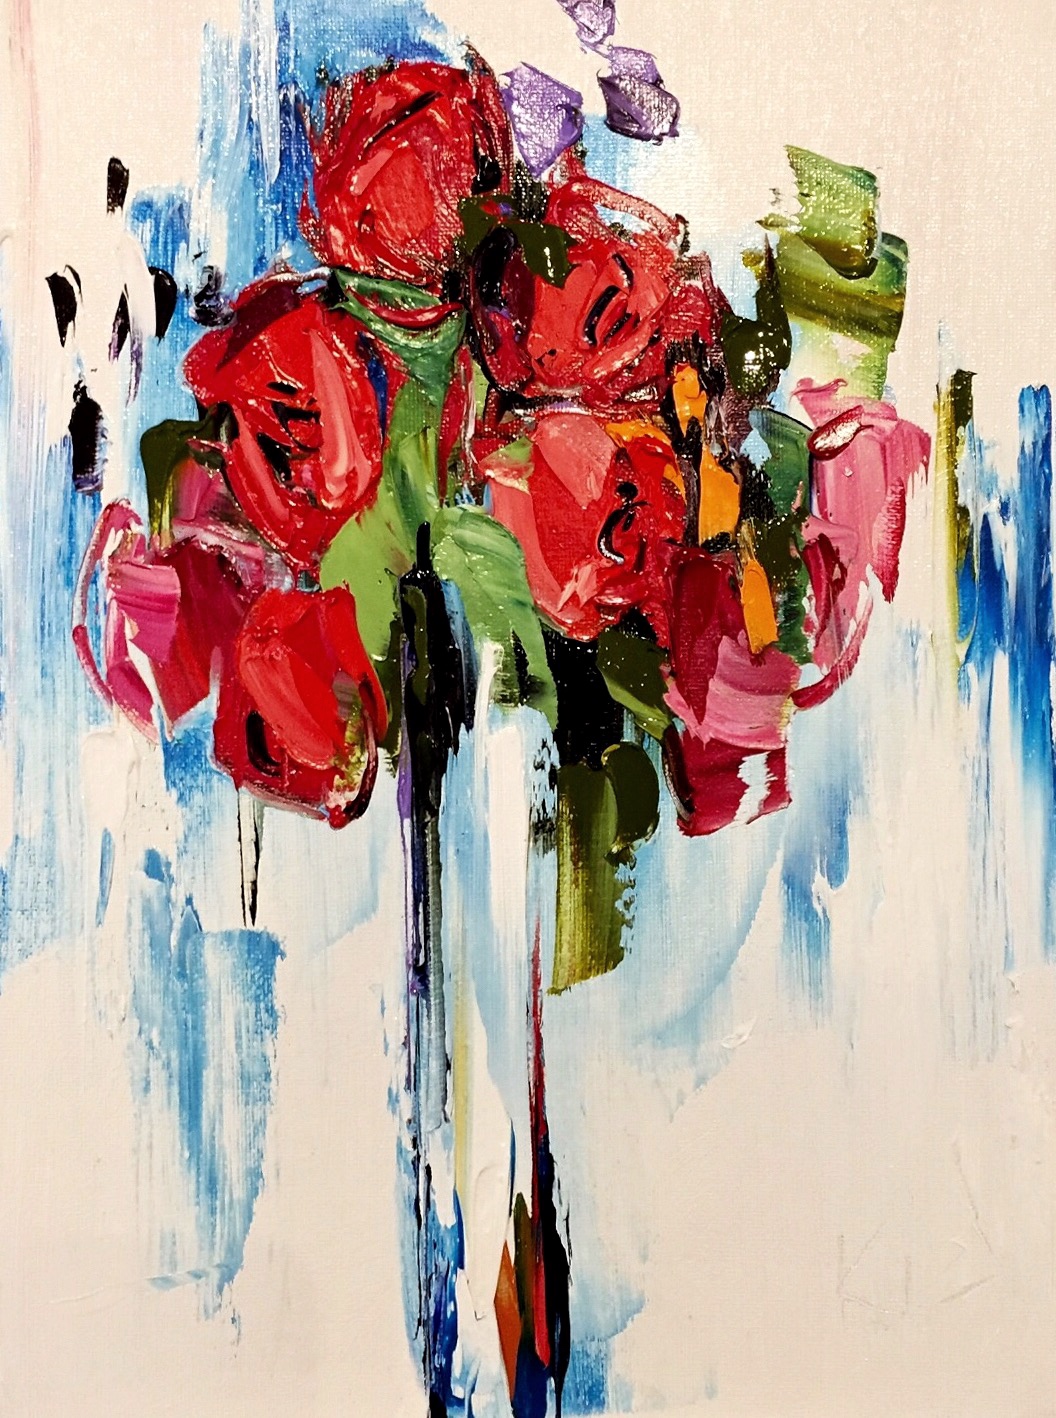 A Little Bit of Loveliness, flower painting by Kimberly Kiel | Effusion Art Gallery + Cast Glass Studio, Invermere BC